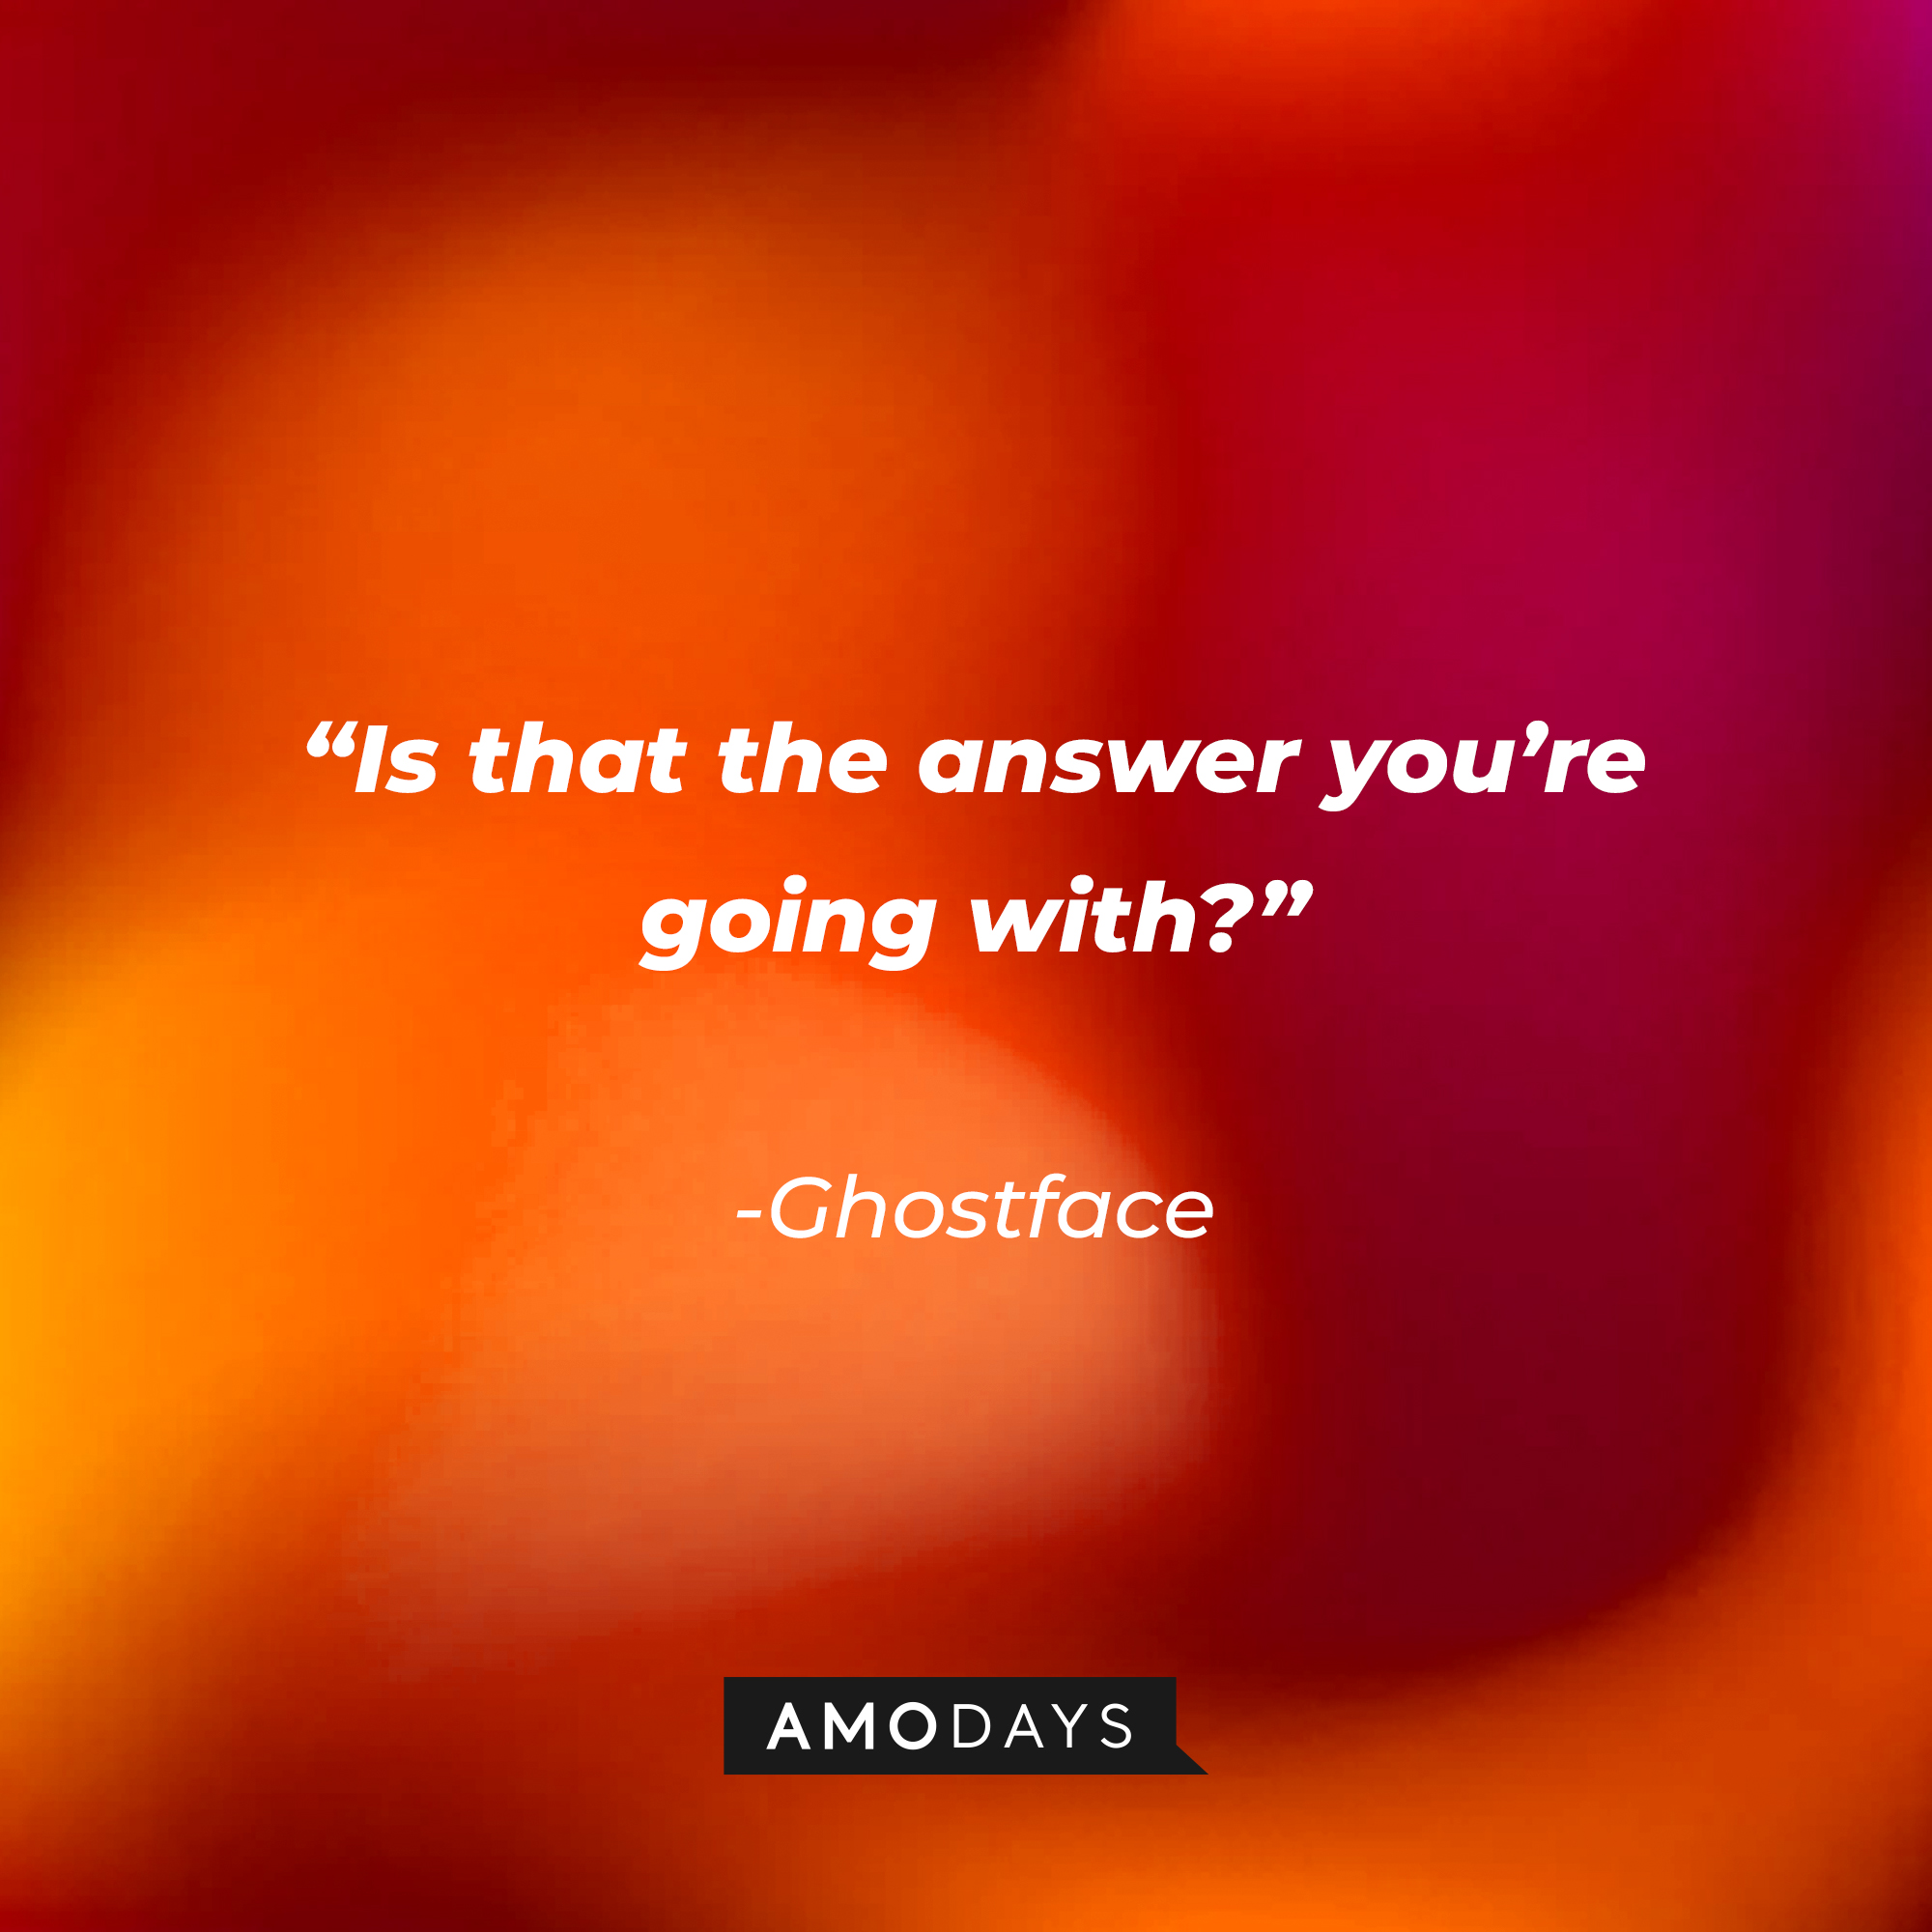 Ghostface’s quote from “Scream ‘(2020)’”: “Is that the answer you’re going with?” | Source: AmoDays